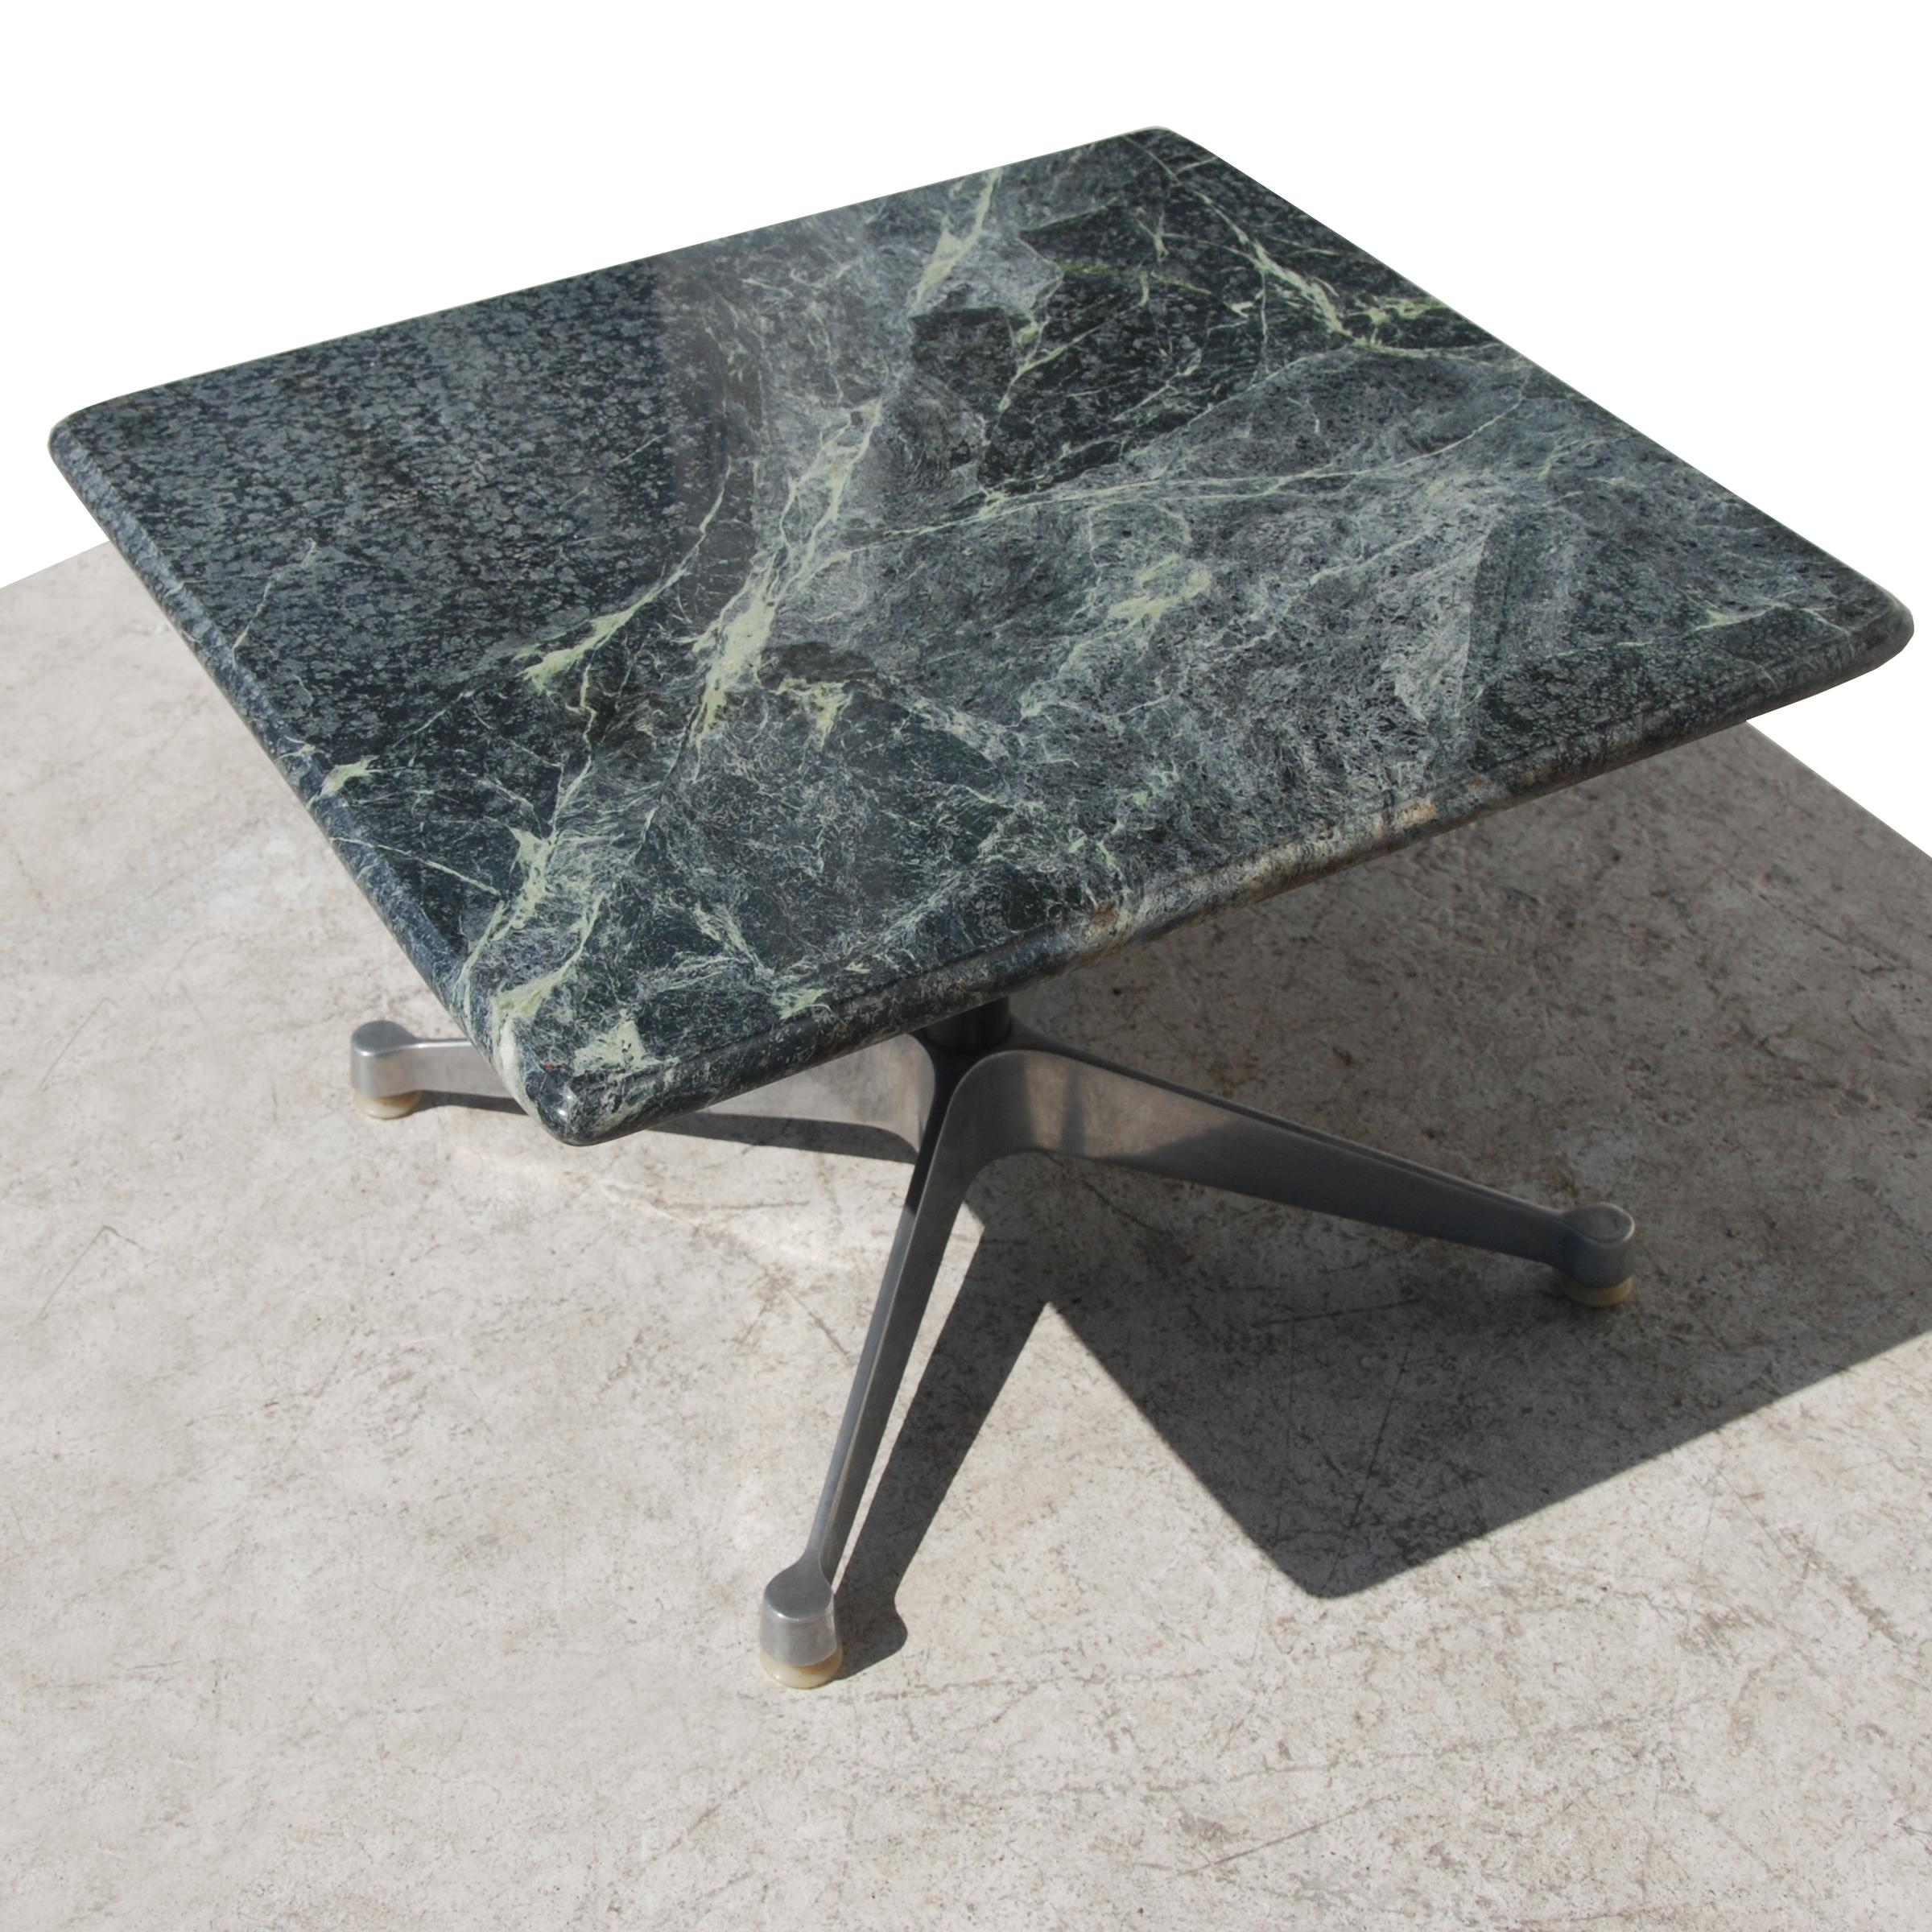 A Mid-Century Modern coffee table designed by Charles and Ray Eames for Herman Miller. An extruded aluminum four star base with a rich green marble top.